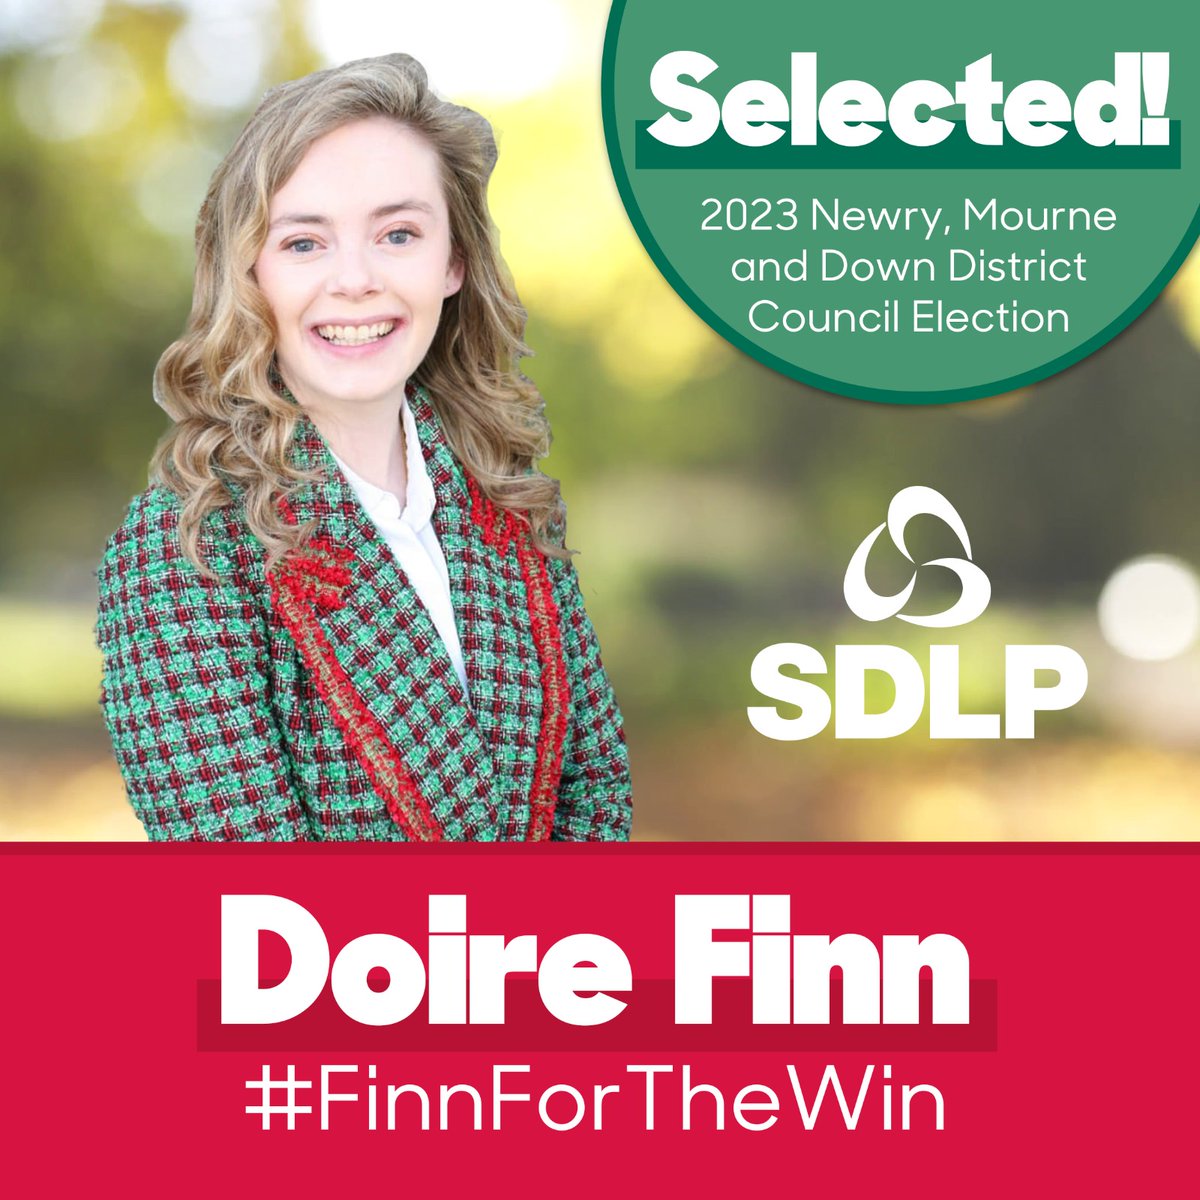 Absolutely delighted to announce that I'll be standing as a candidate for @SDLPlive in Newry ❤️

 I've worked in the Assembly for the last 3 years, and feel blessed to be given the opportunity to represent the people and city that I love.

Bring on the next month! #Finnforthewin